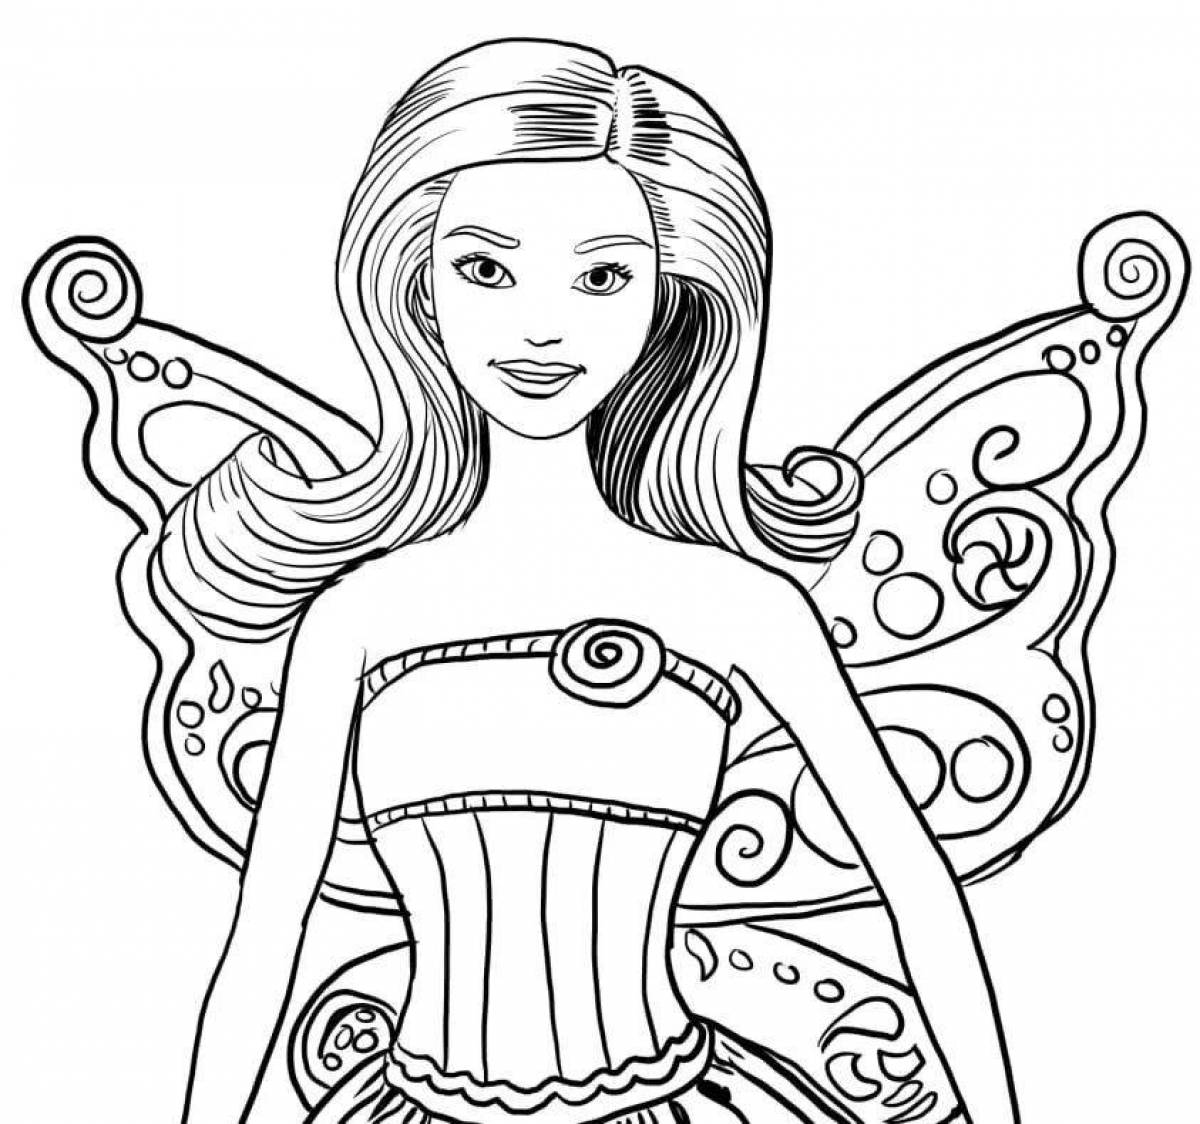 Barbie fairytale coloring page